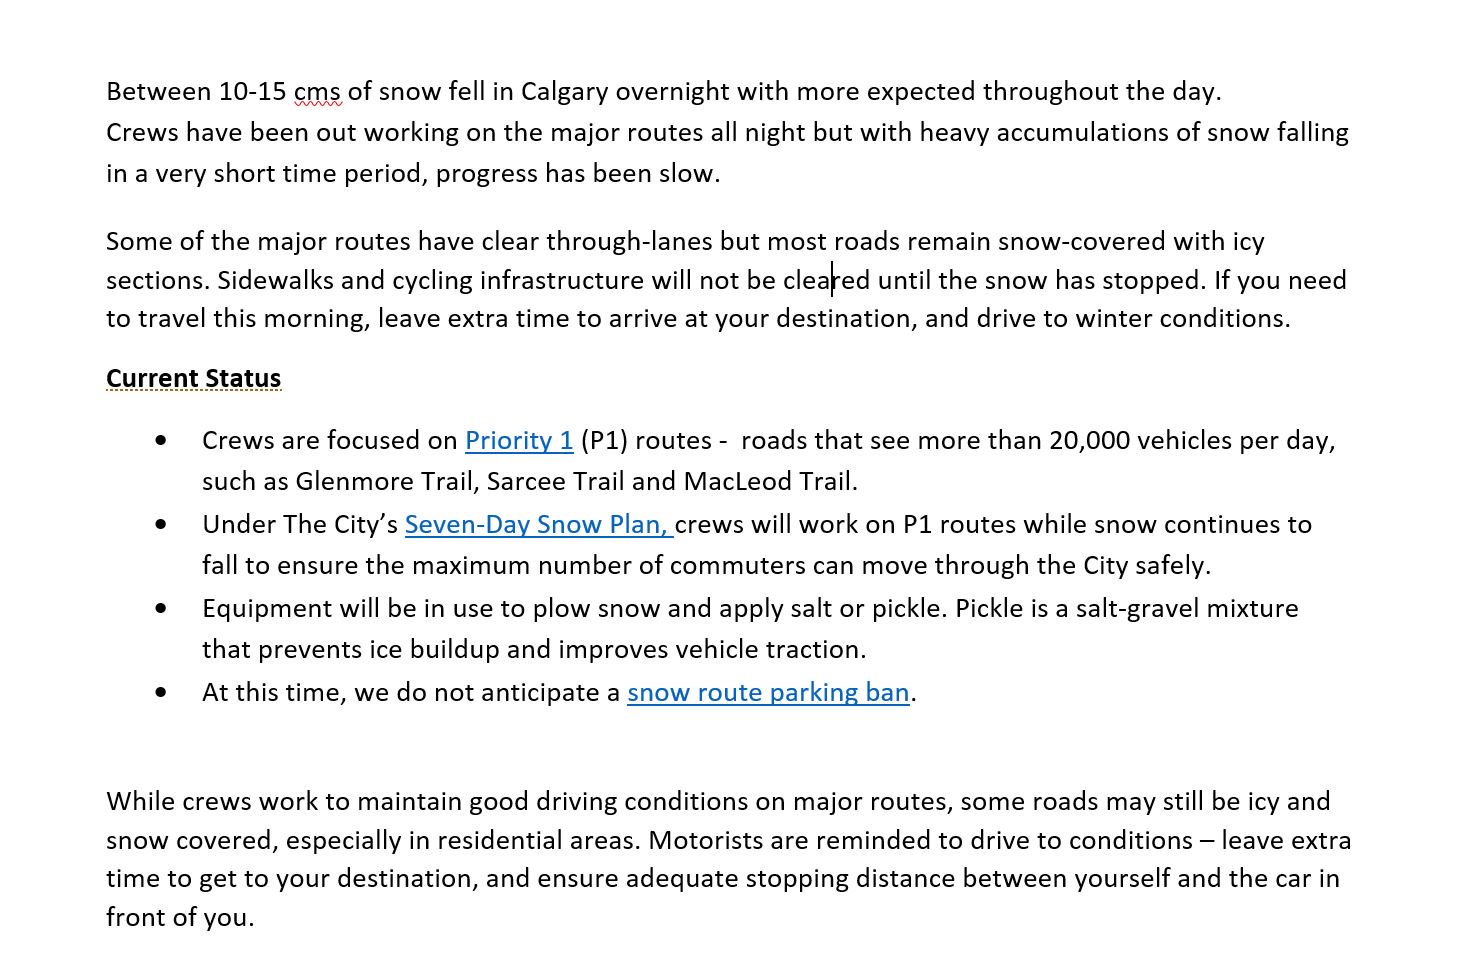 YYC Transportation on X: Plows are out on the major routes but